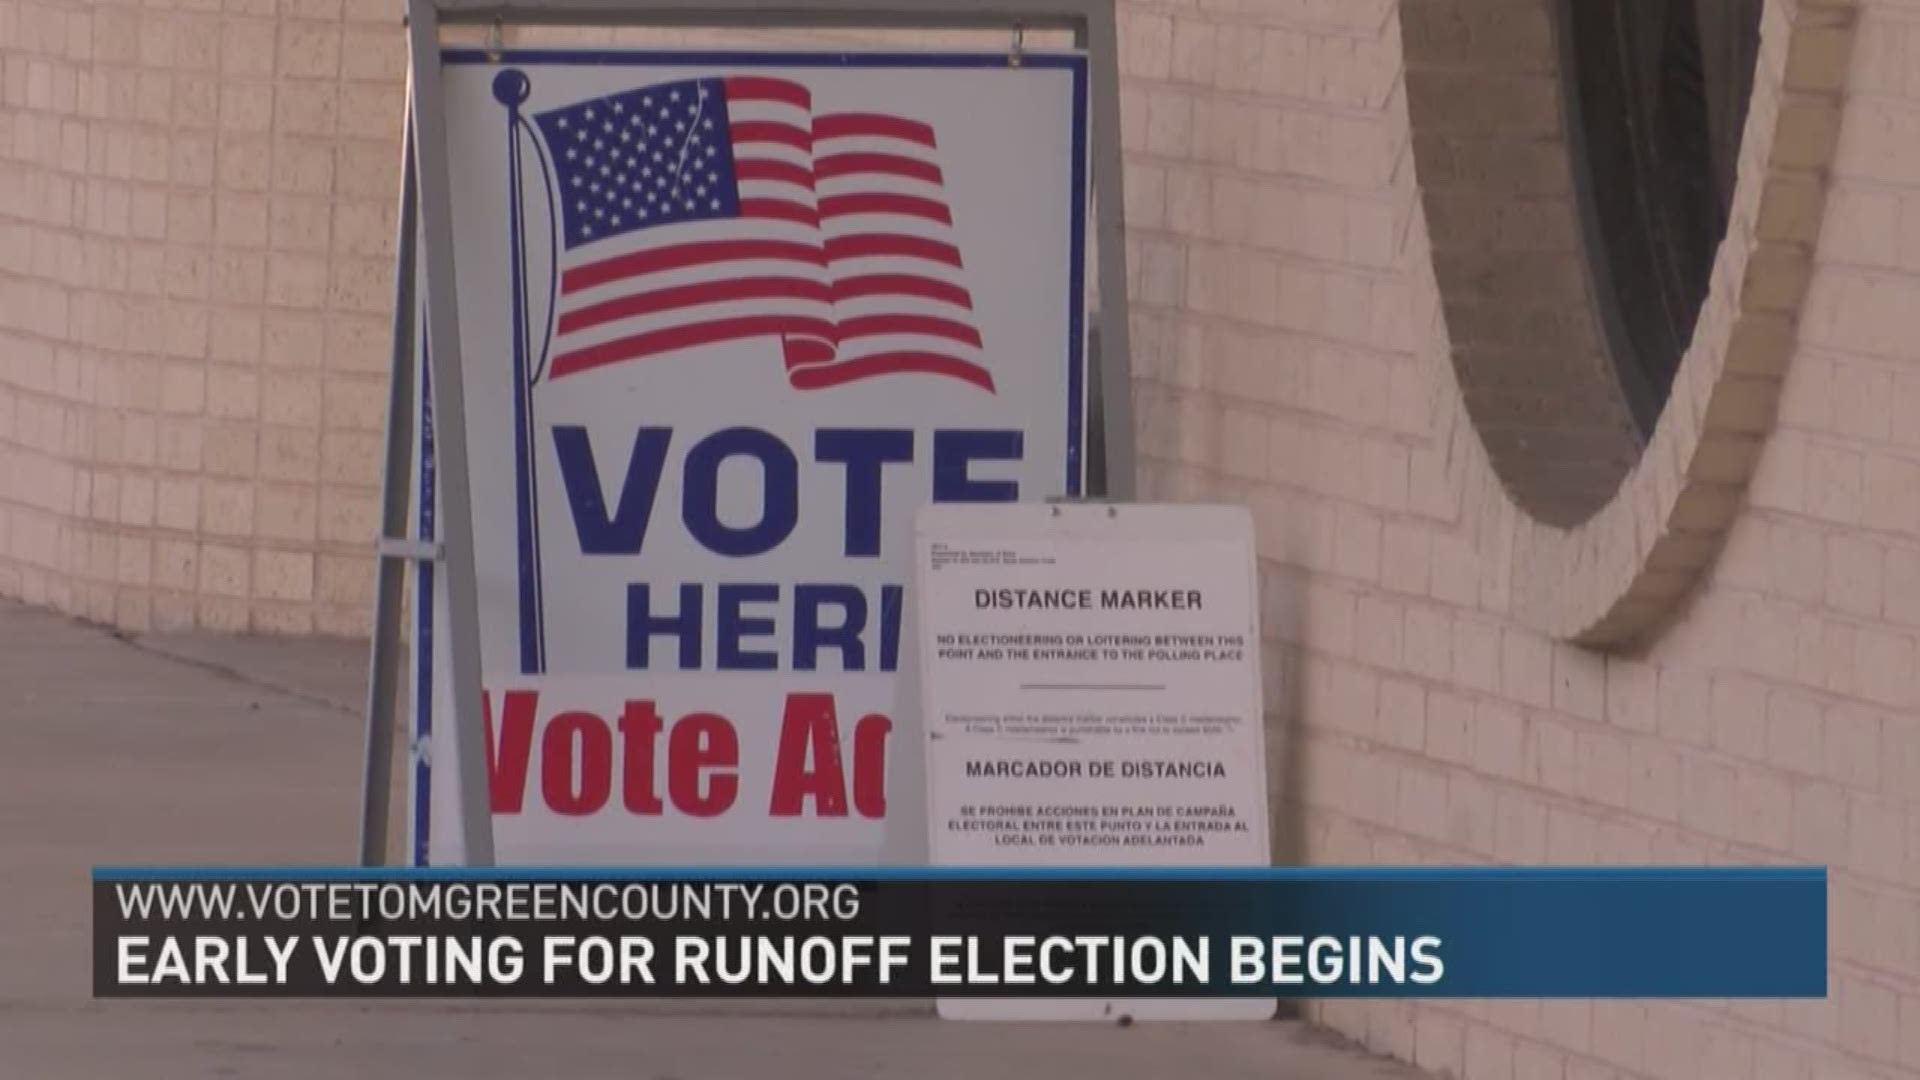 Early voting has begun for the runoff election for the District 6 city council seat.